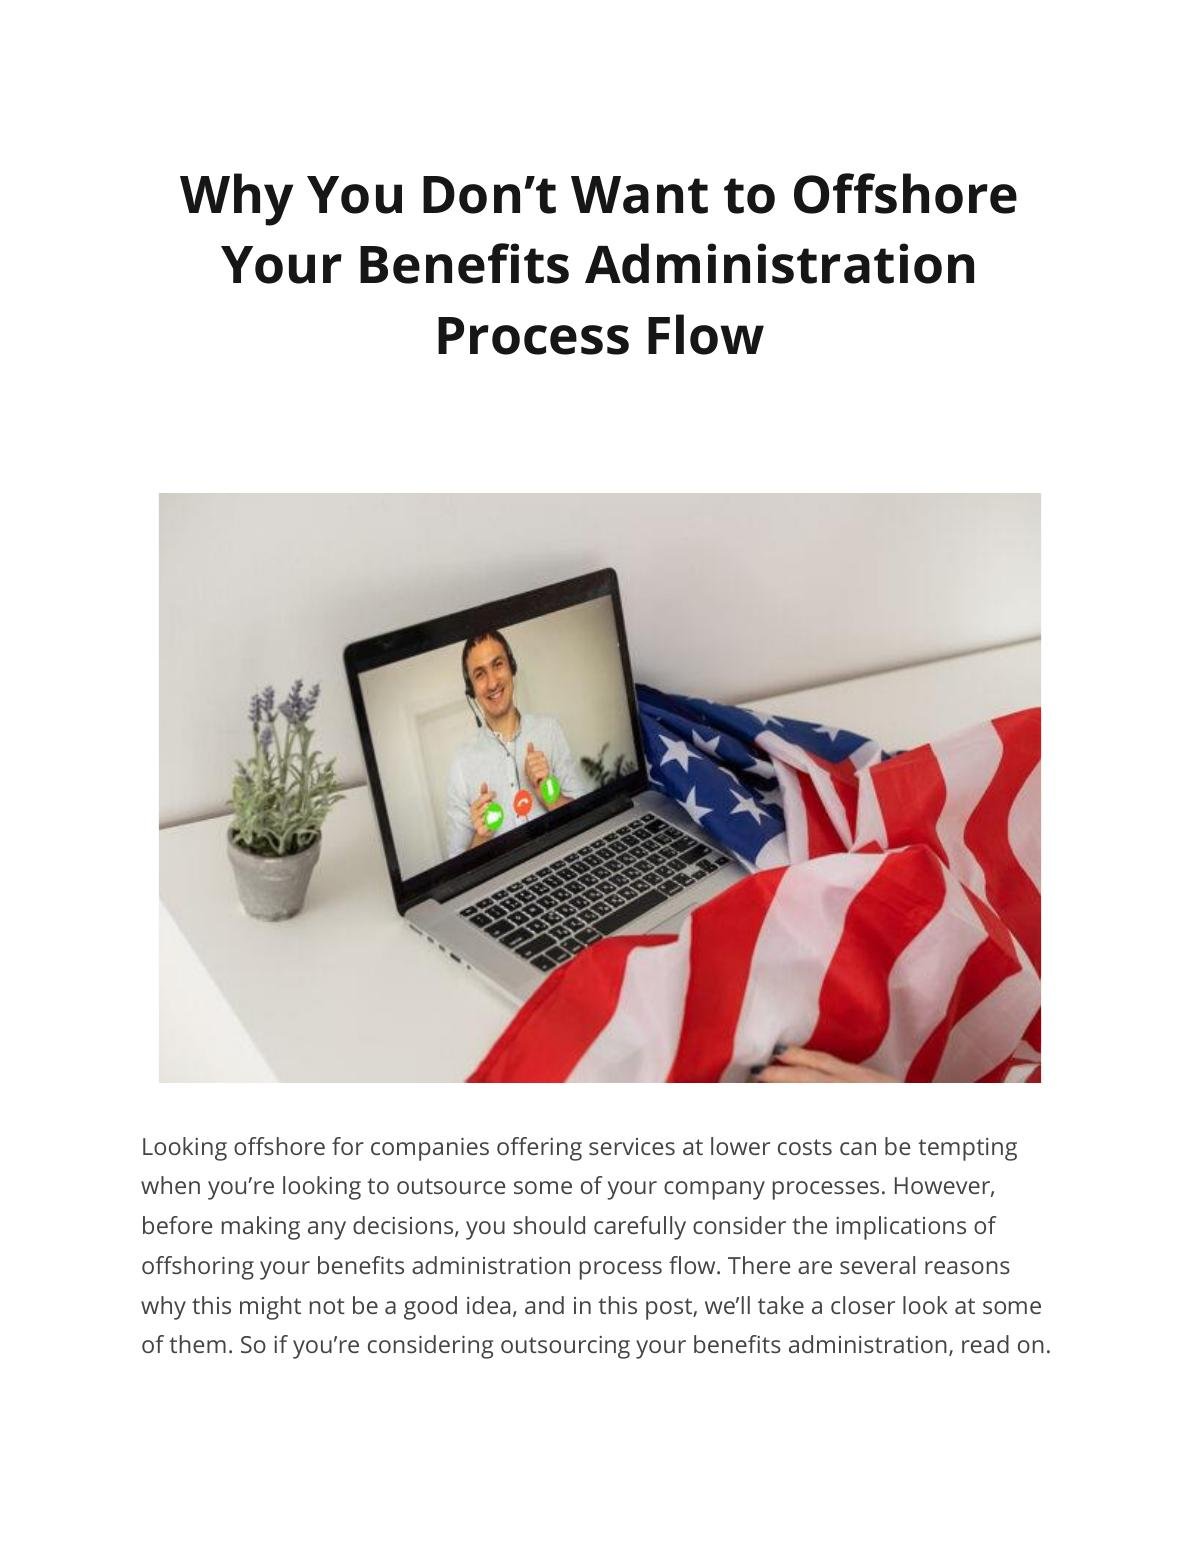 Why You Don’t Want to Offshore Your Benefits Administration Process Flow 